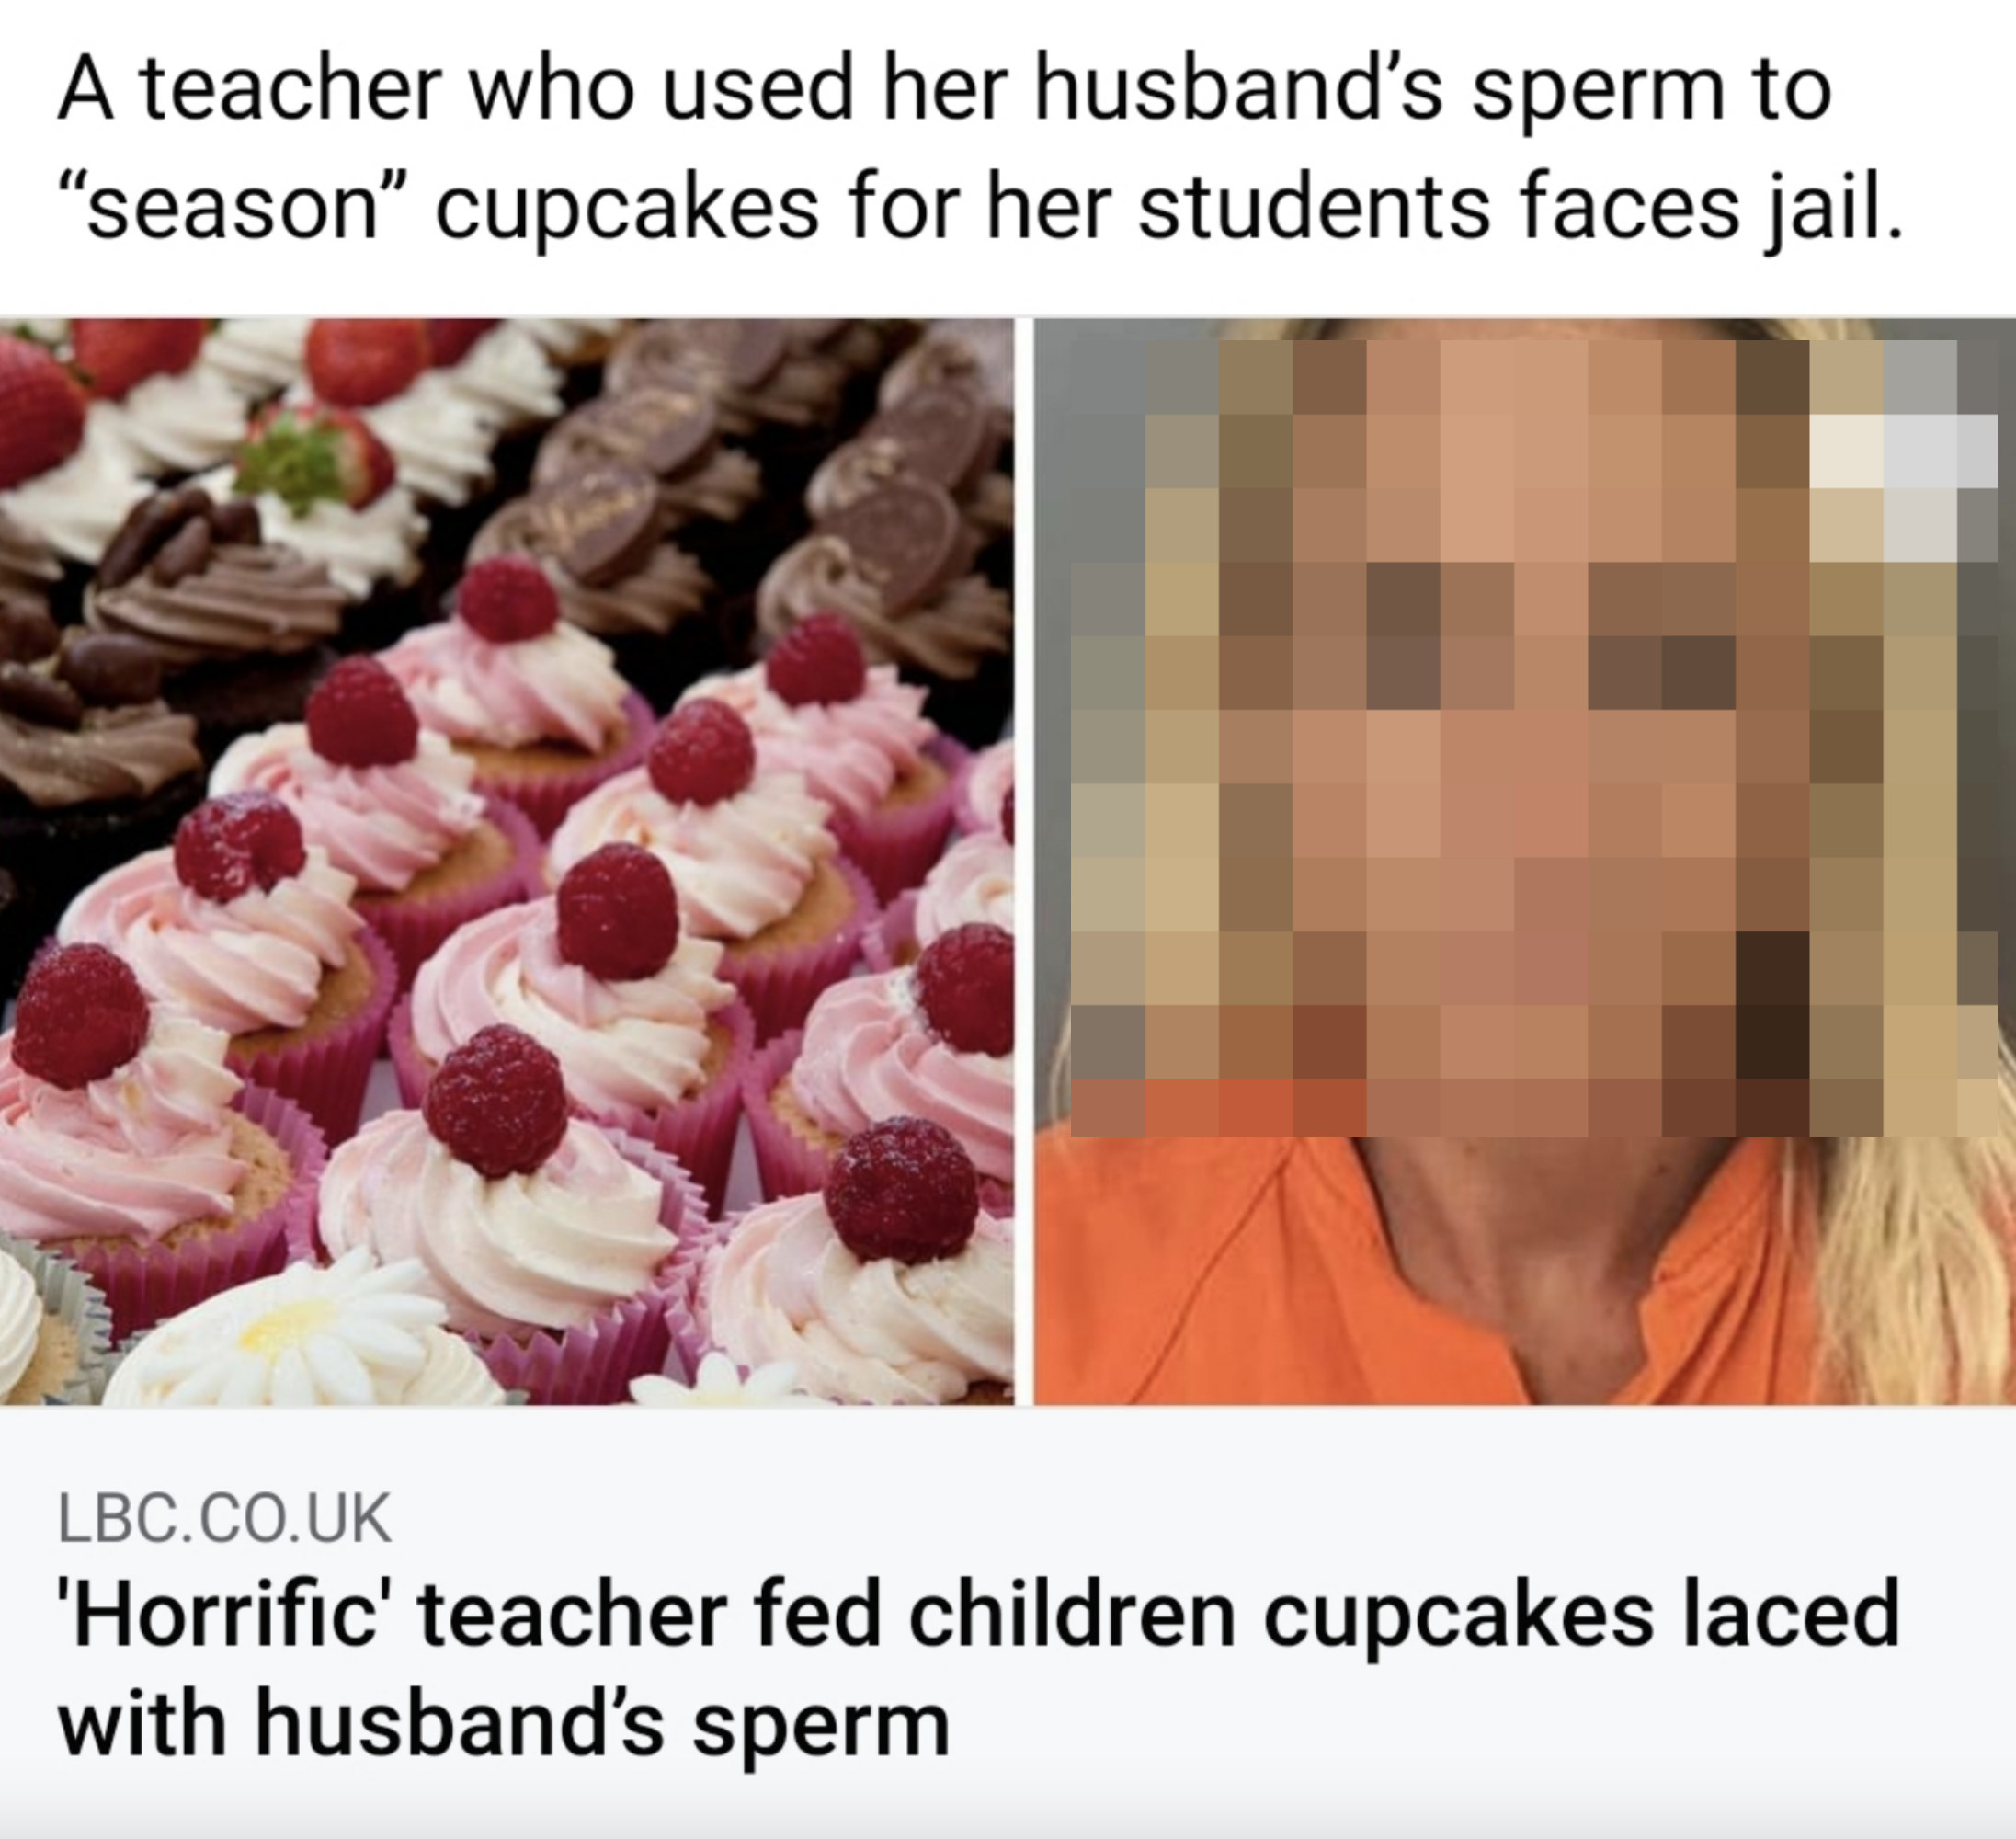 Article from Facebook that reads: &quot;A teacher who used her husband&#x27;s sperm to &#x27;season&#x27; cupcakes for her students faces jail&quot;